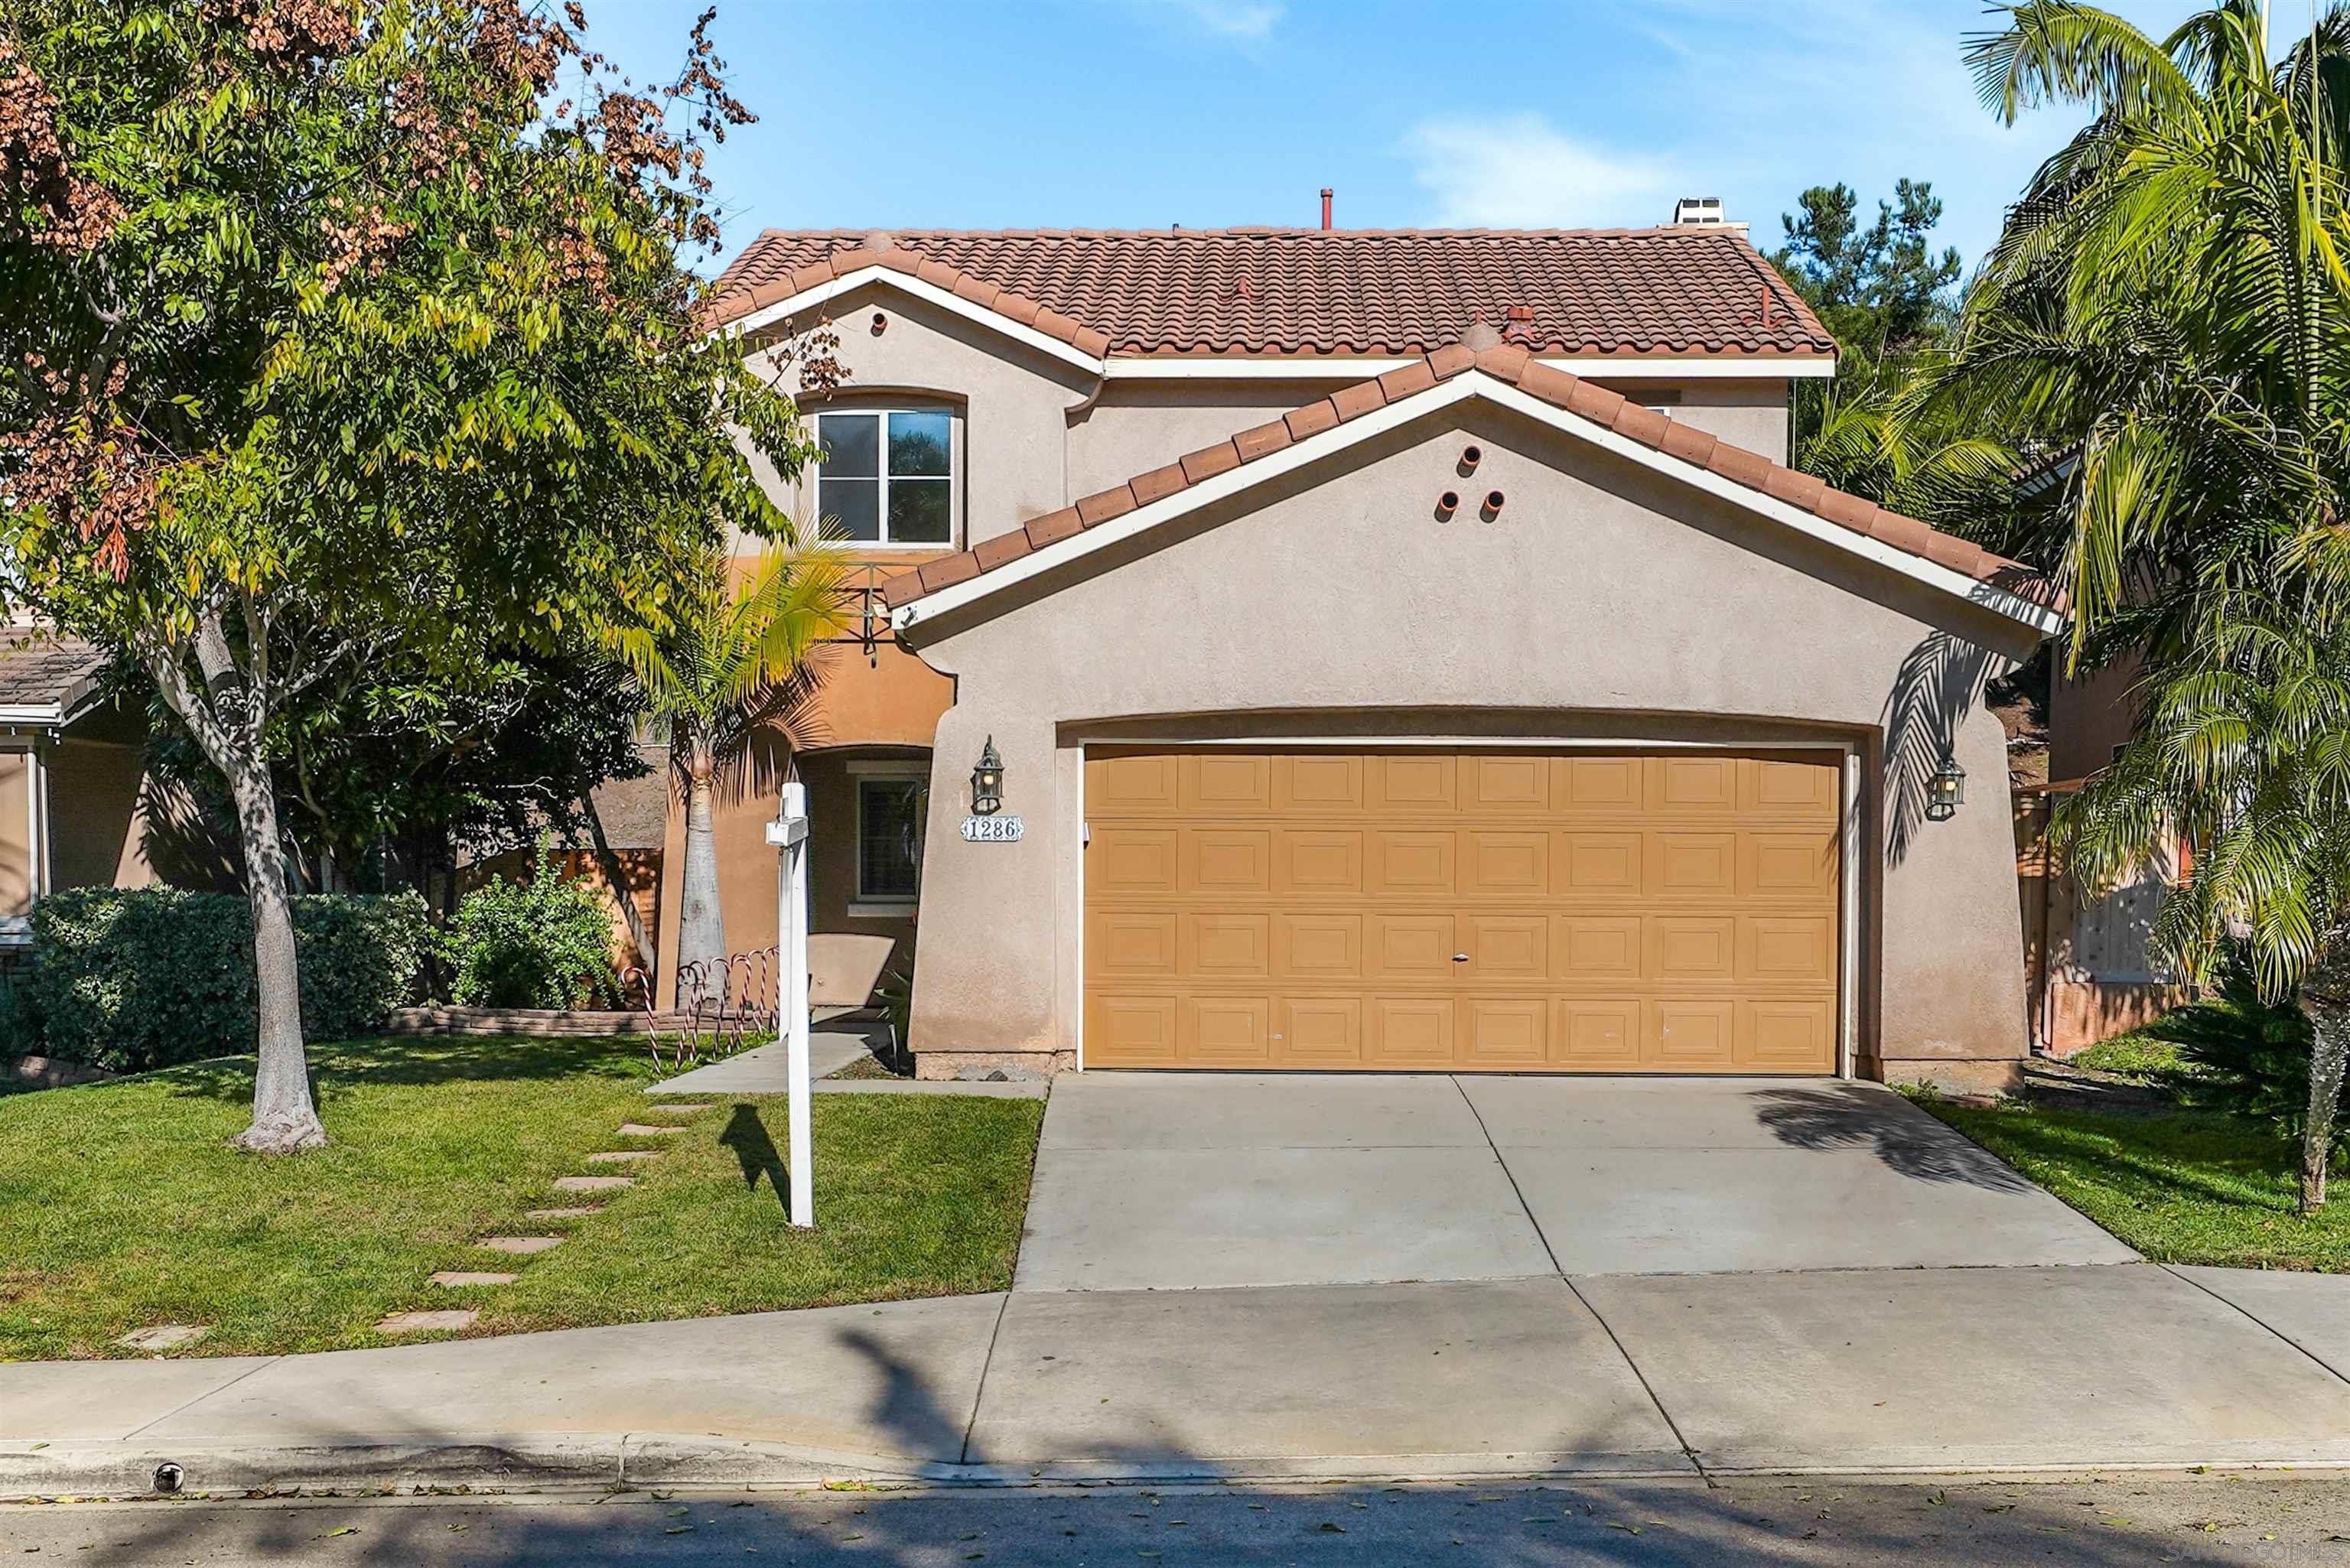 Open House. Open House on Saturday, December 18, 2021 12:00PM - 3:00PM